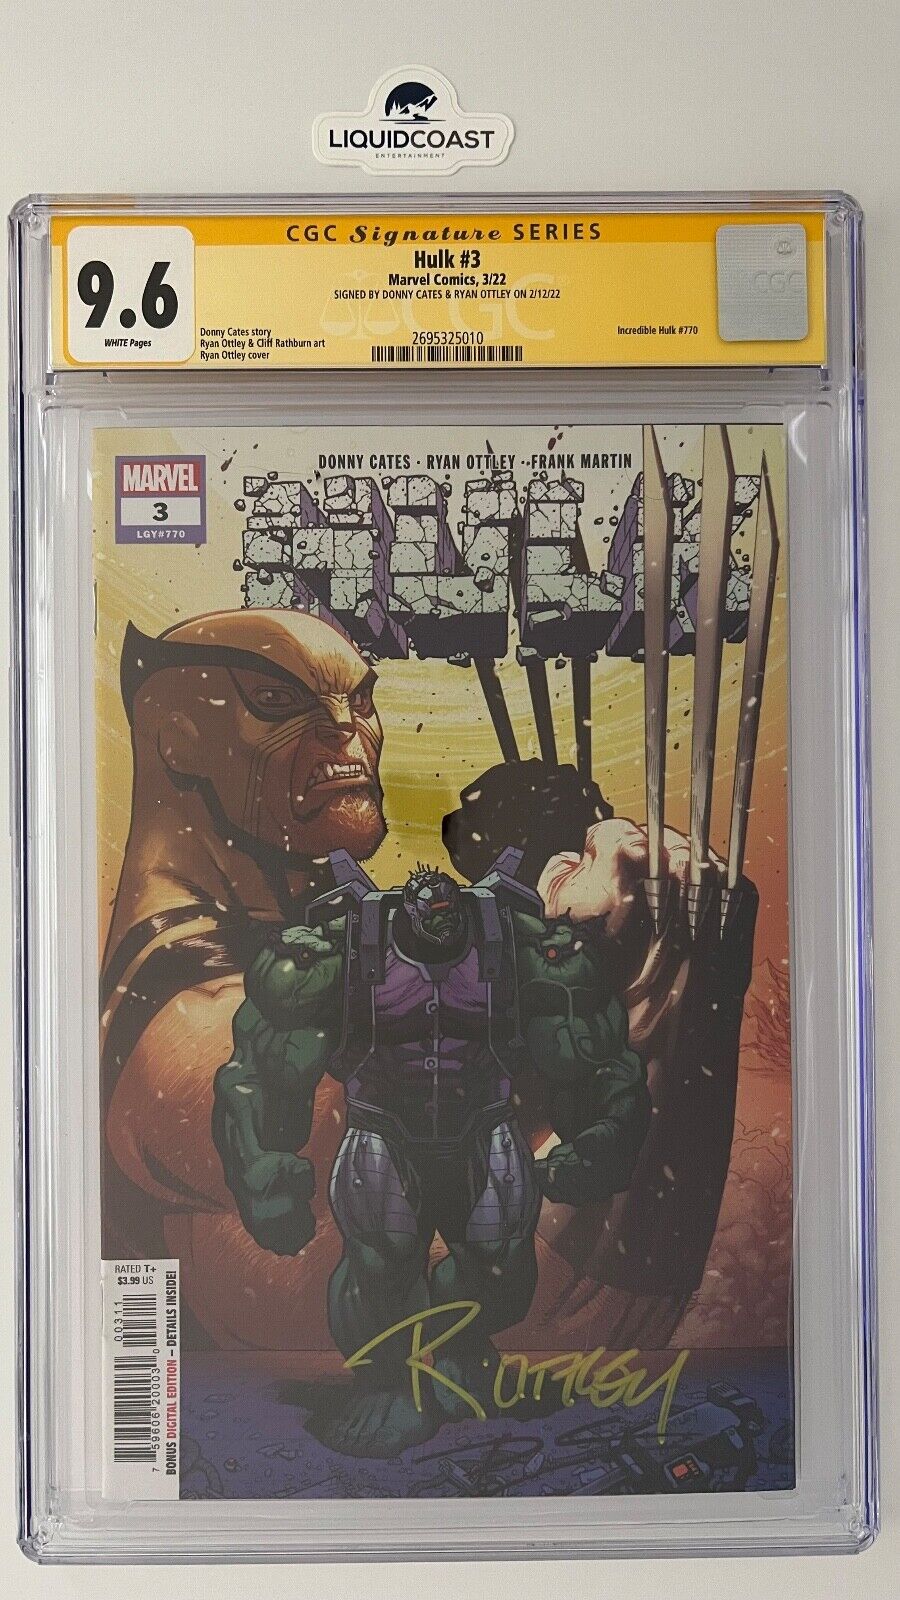 Hulk #3 / #770 SS CGC 9.6 signed by Donny Cates and Ryan Ottley